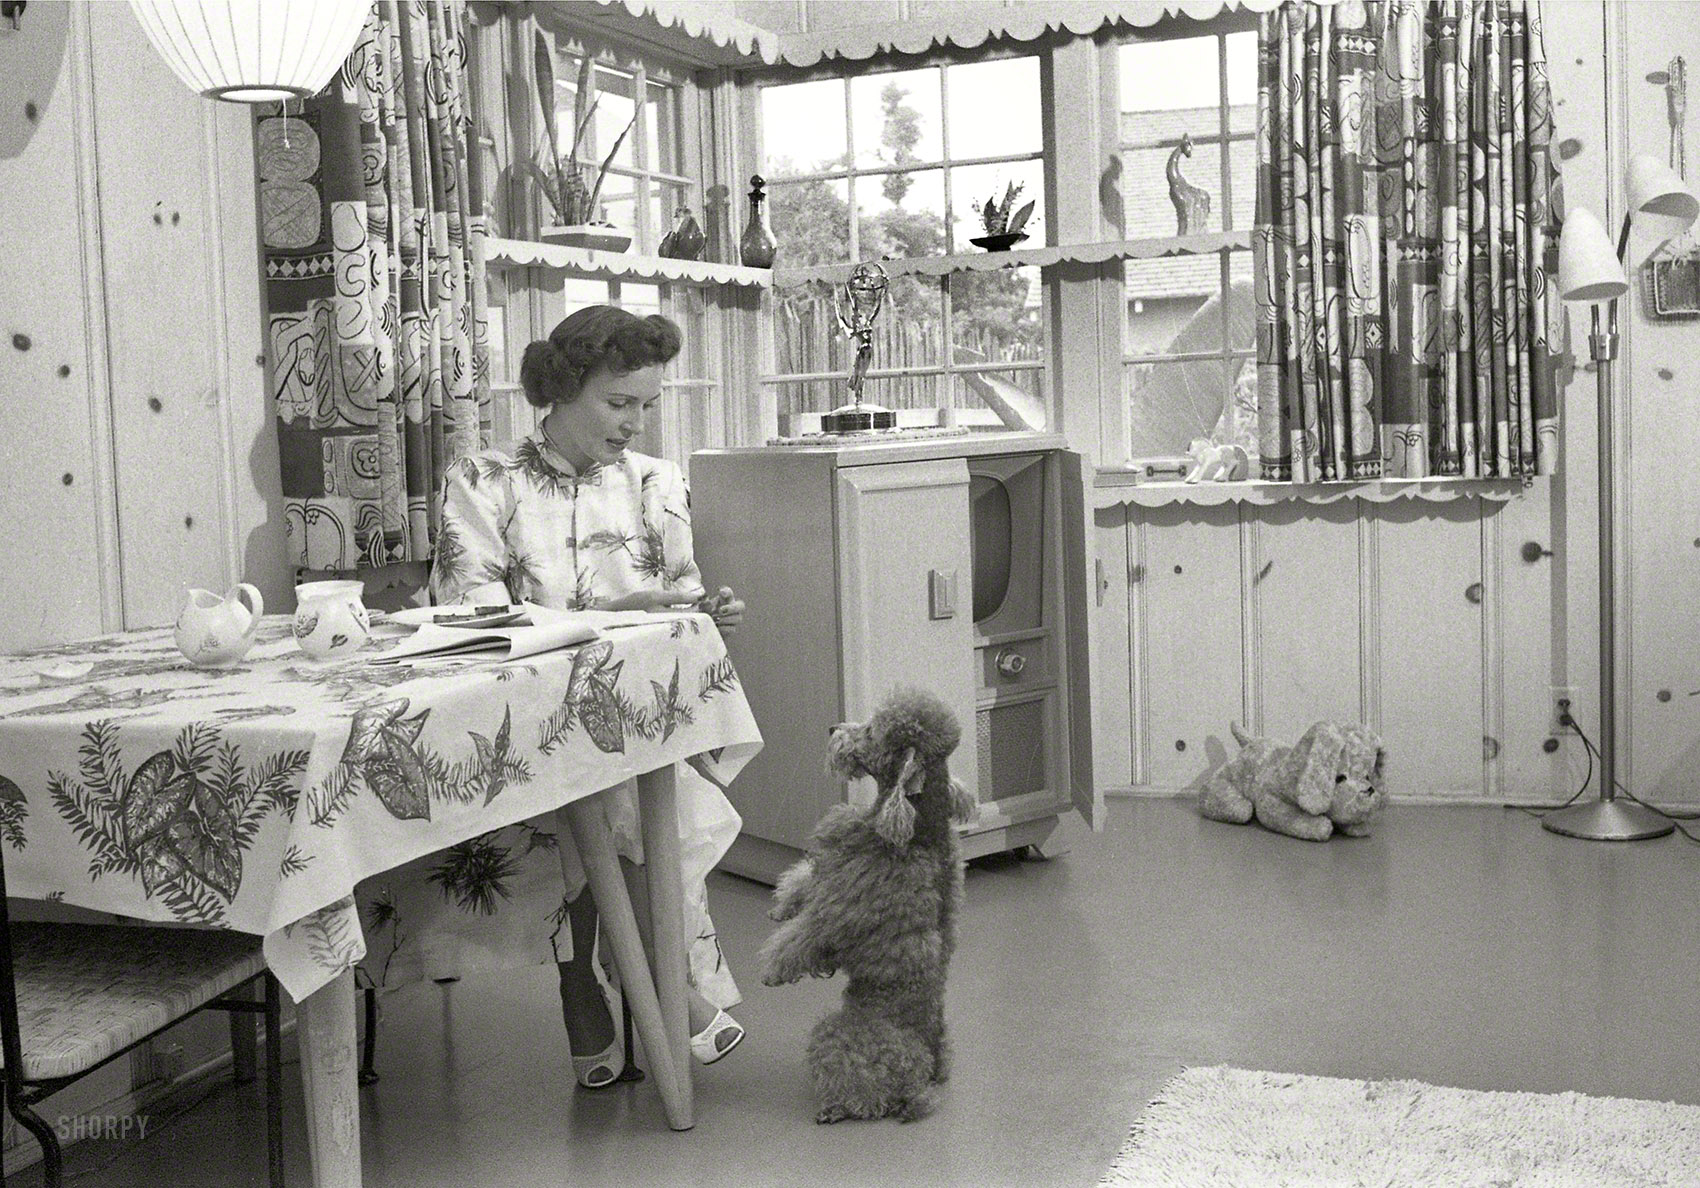 Los Angeles circa 1954. "Actress Betty White at home with her dog." Note what looks like an Emmy Award atop the television set. Photos by Maurice Terrell and Earl Theisen for Look magazine. View full size.